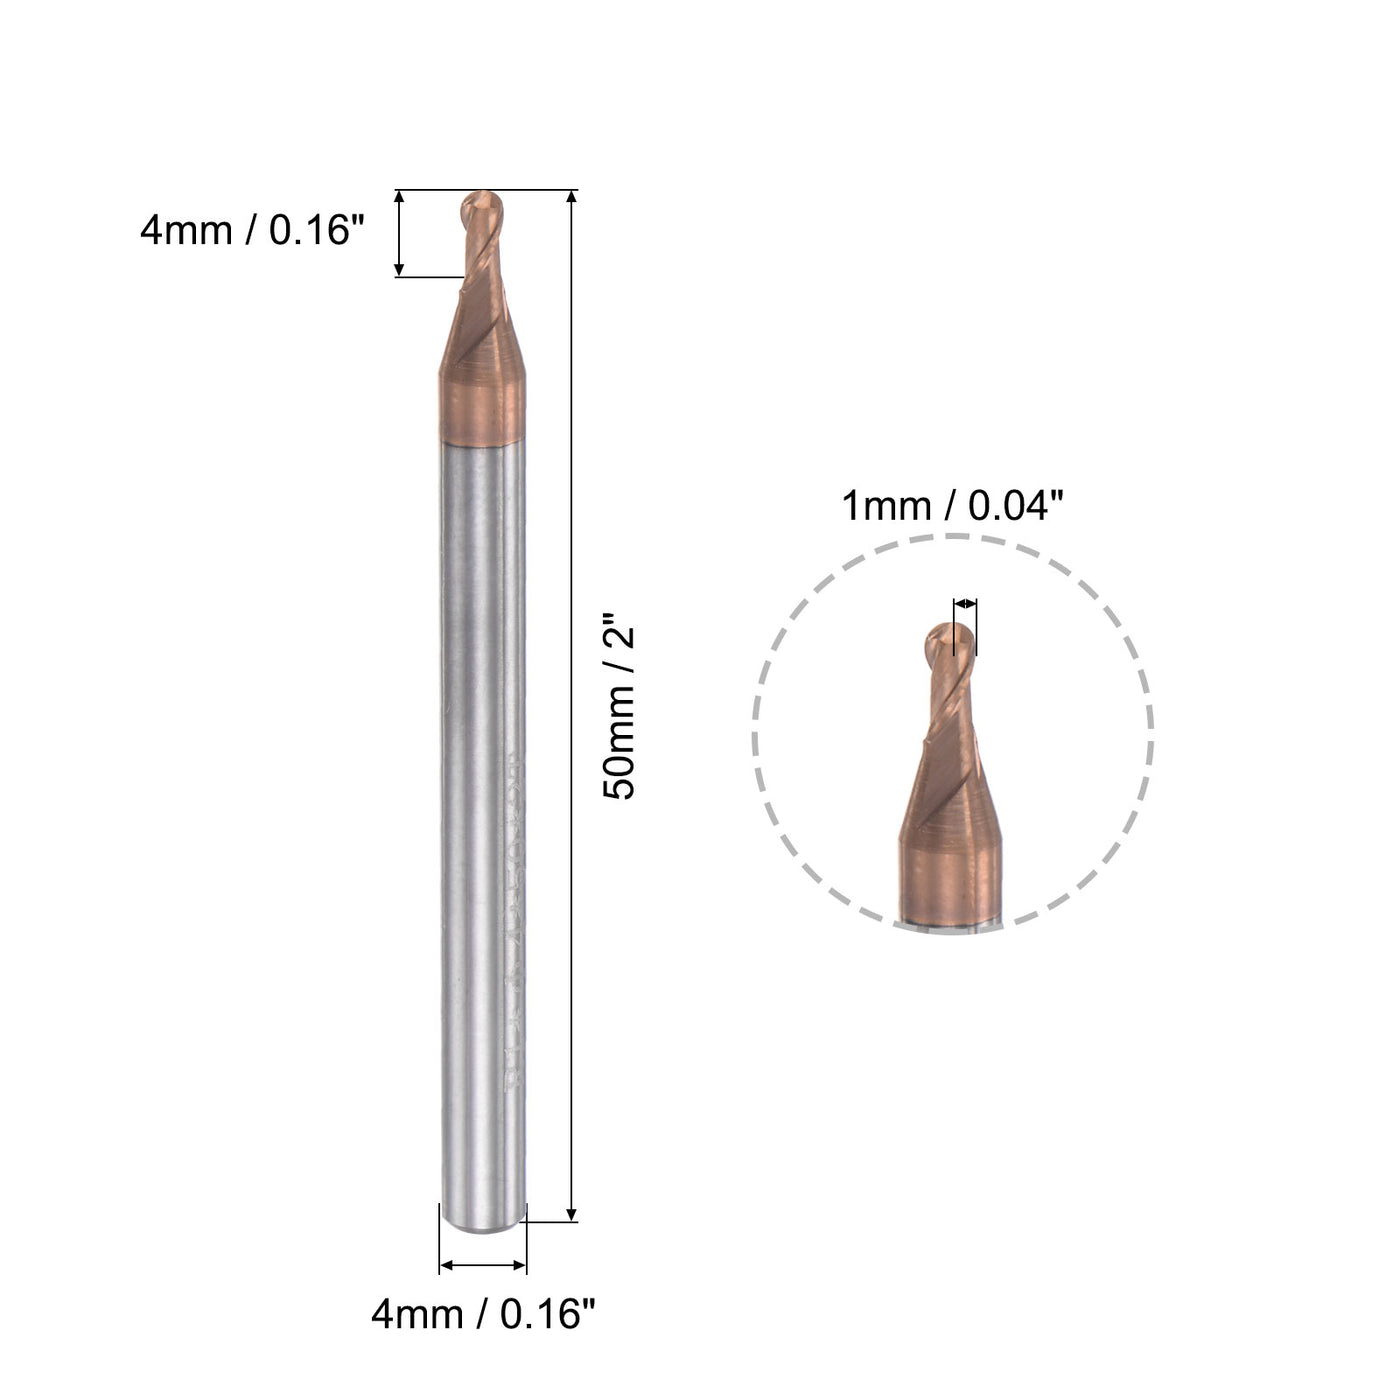 uxcell Uxcell 1mm Radius 50mm Long HRC55 Carbide AlTiSin Coated 2 Flute Ball Nose End Mill